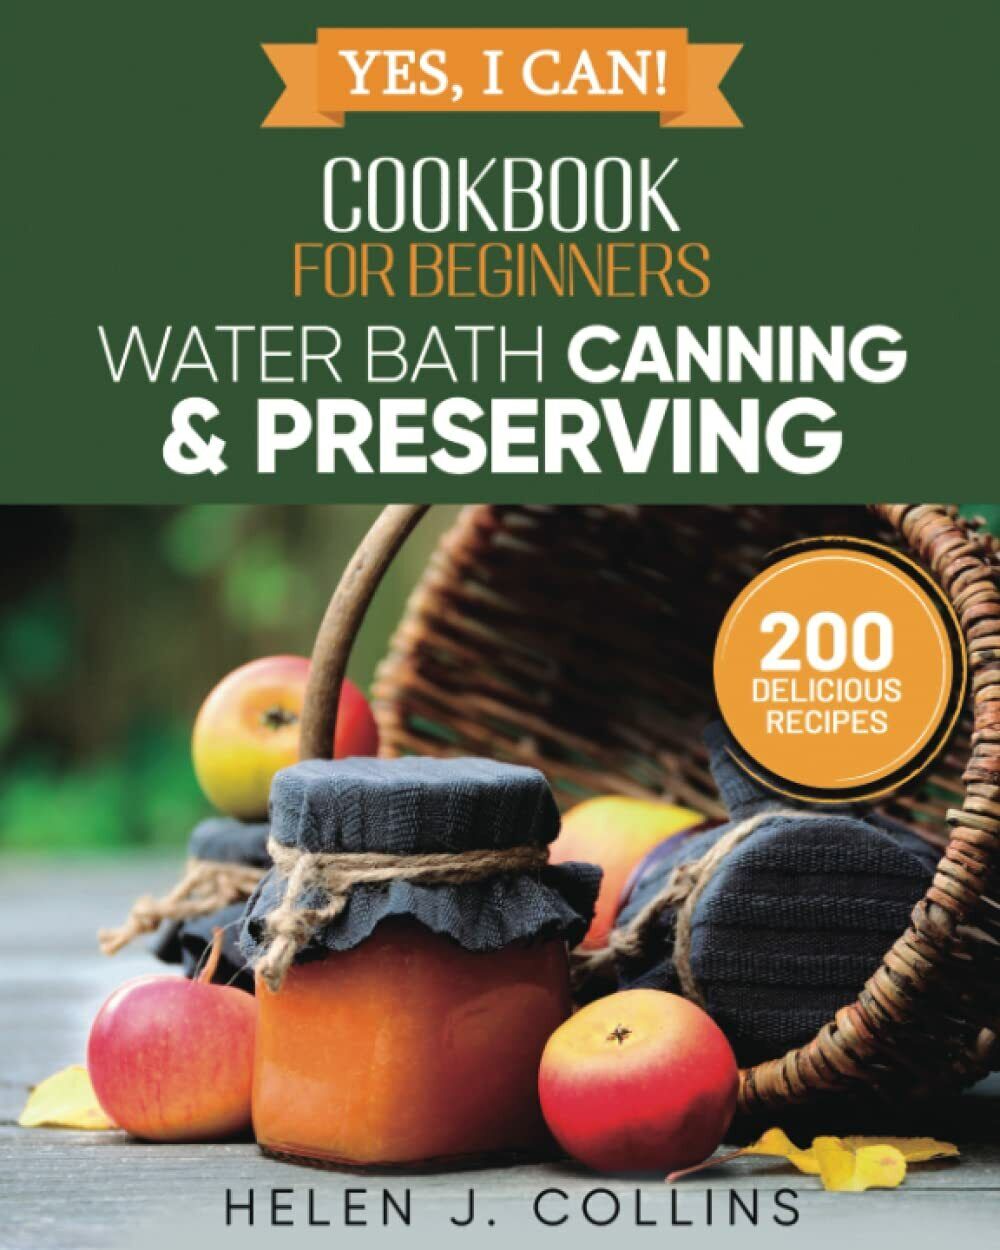 Yes, I Can! Water Bath Canning and Preserving for Beginners: A Complete Cookbook